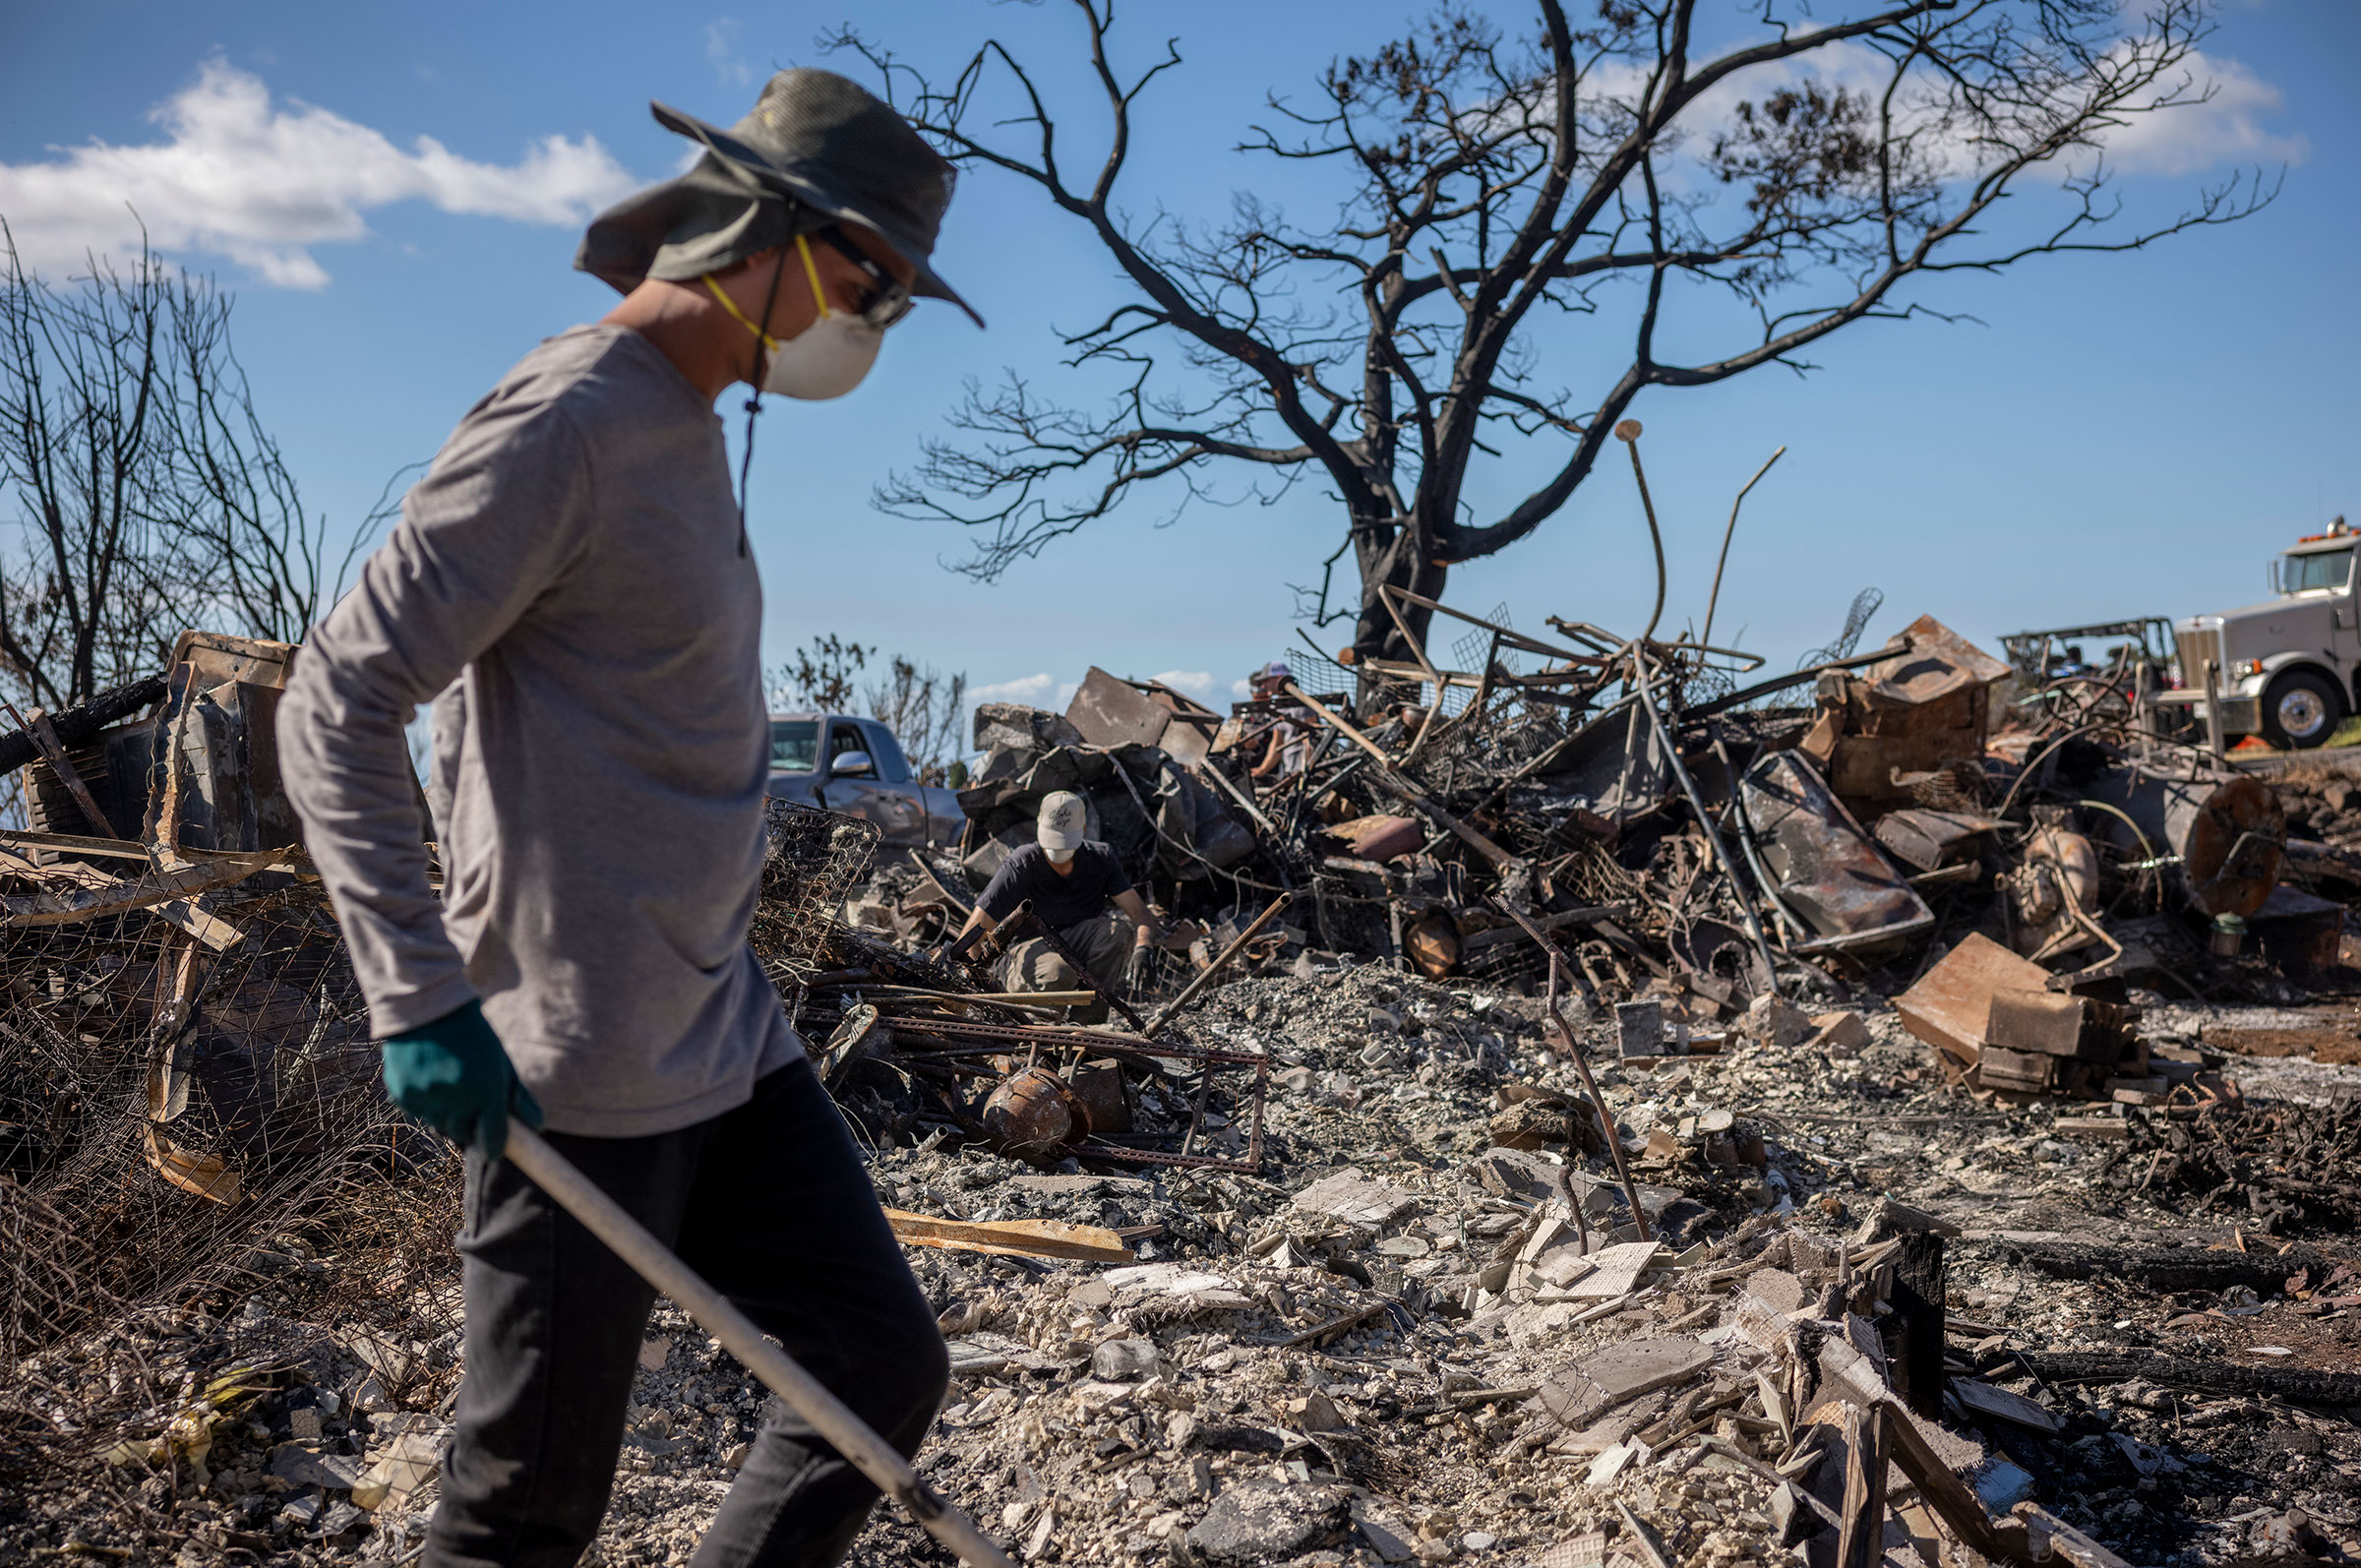 Spencer Kim helps clear debris at the ruins of a house belonging to a friend in the small hillside town of Kula on Aug. 12.  (David Butow for TIME)